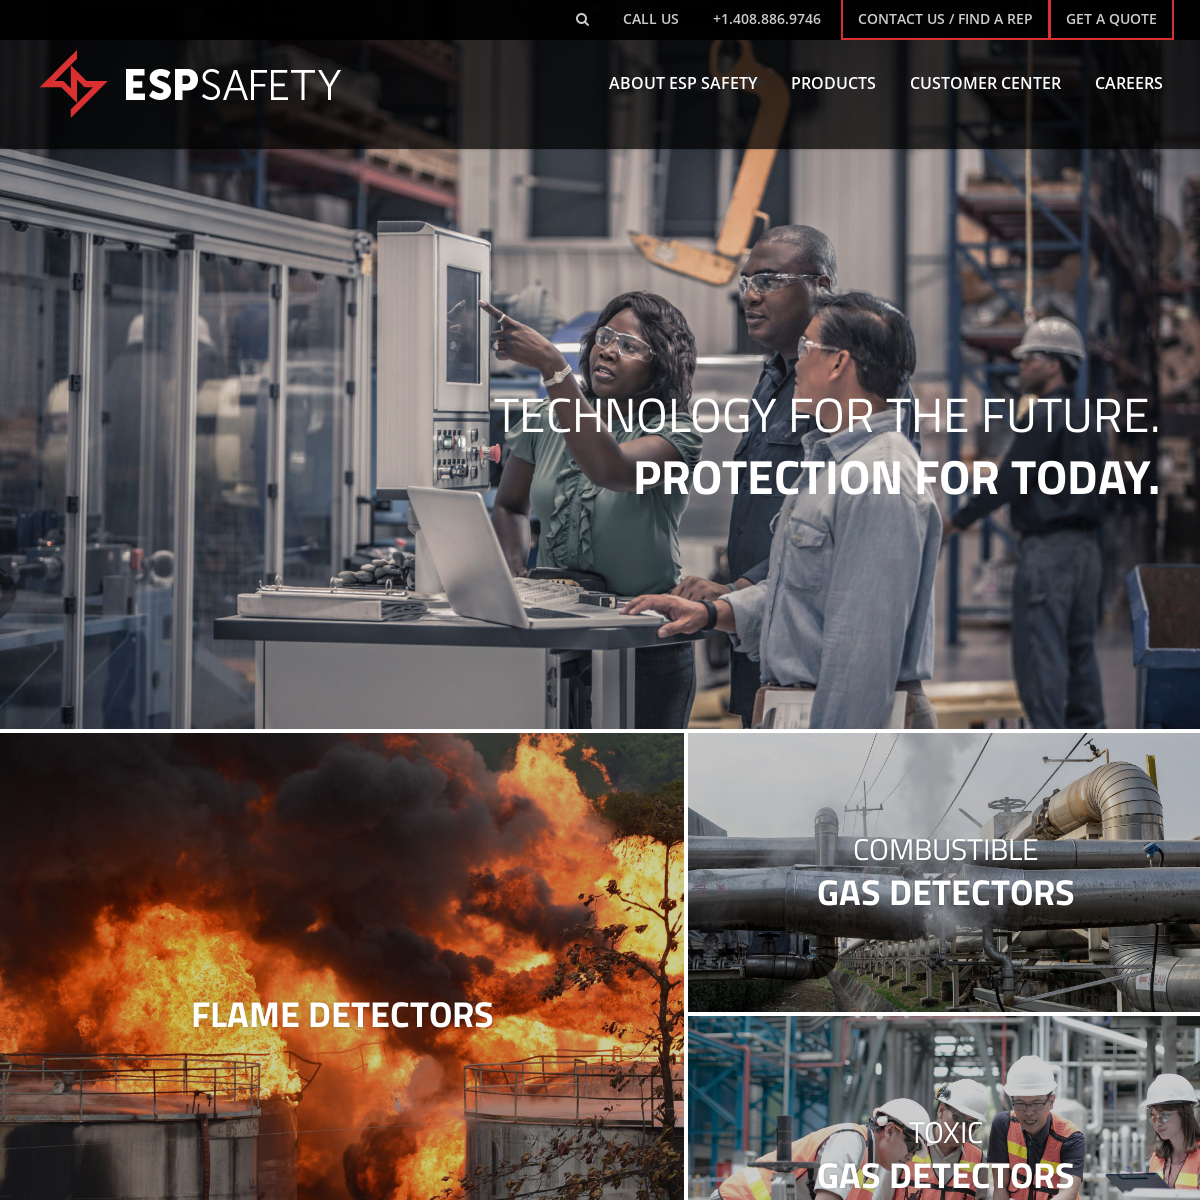 A complete backup of espsafetyinc.com